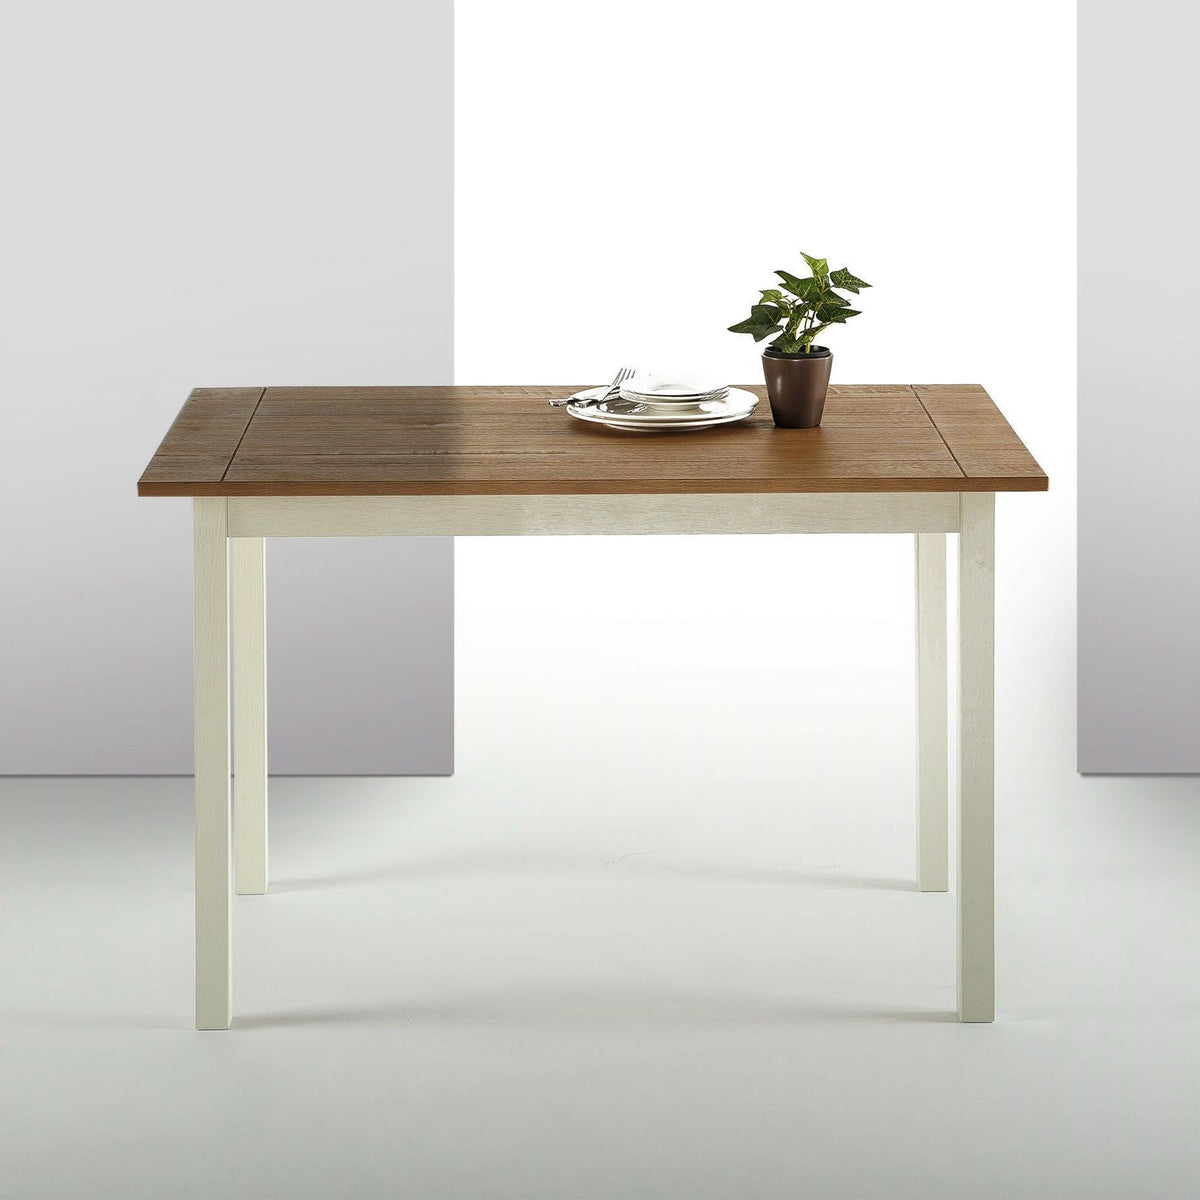 Classic Pine Wood 45 x 28 inch Dining Table with White Legs